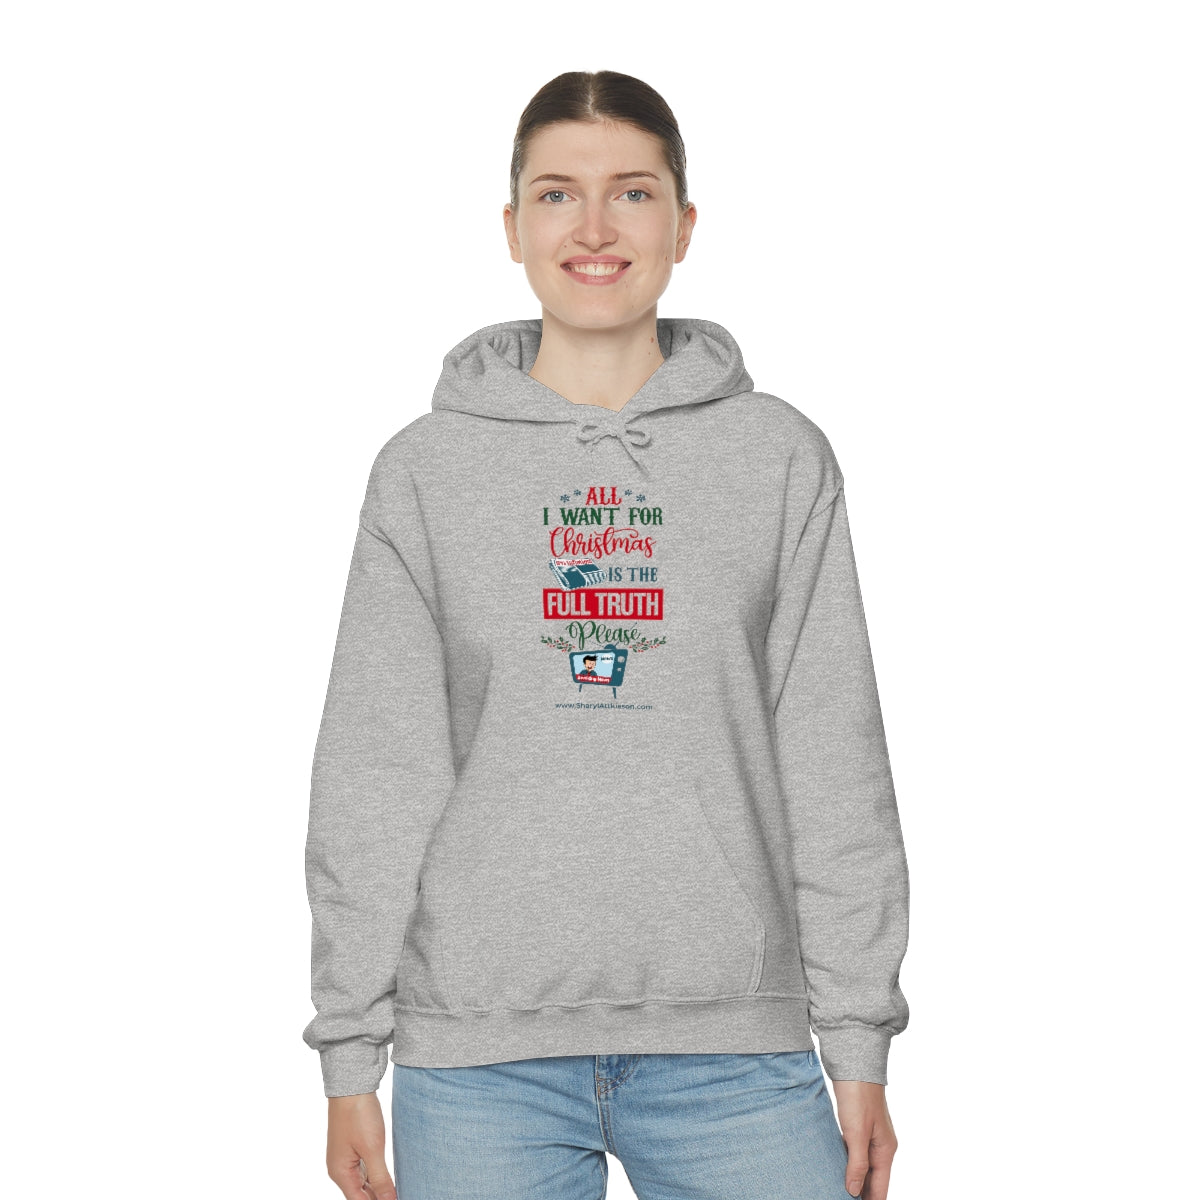 'All I Want for Christmas is the Full Truth, Please' Unisex Hooded Sweatshirt (8 colors)